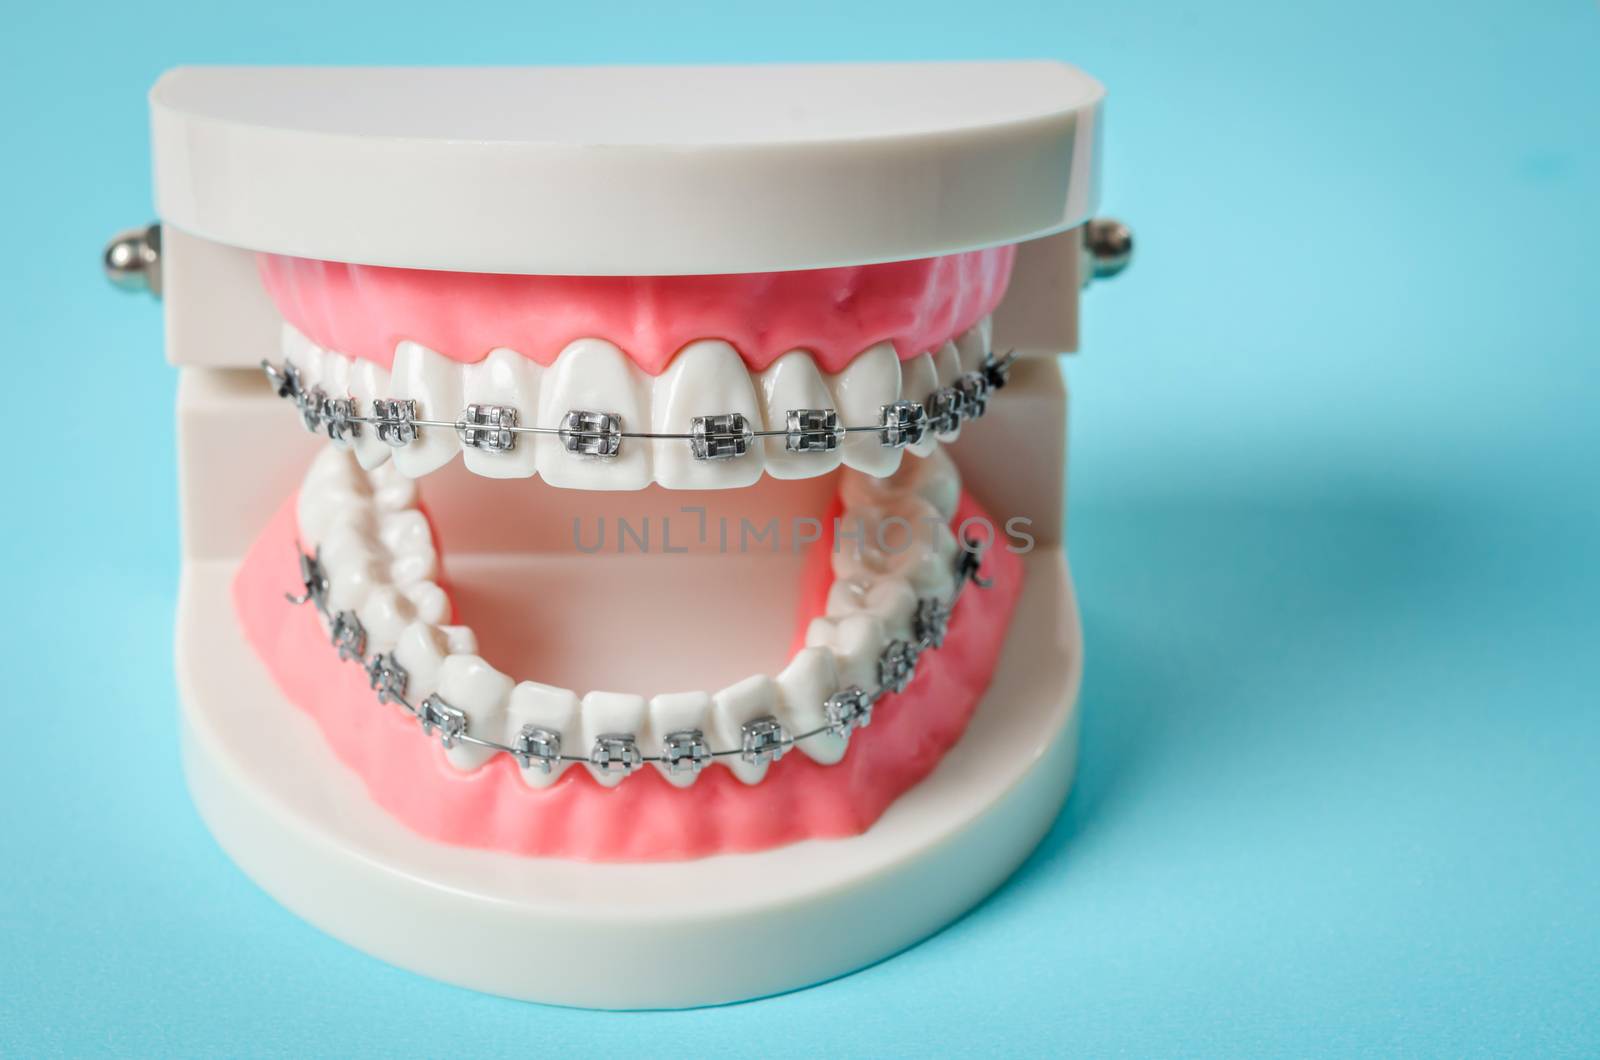 tooth model with metal wire dental braces on blue background.